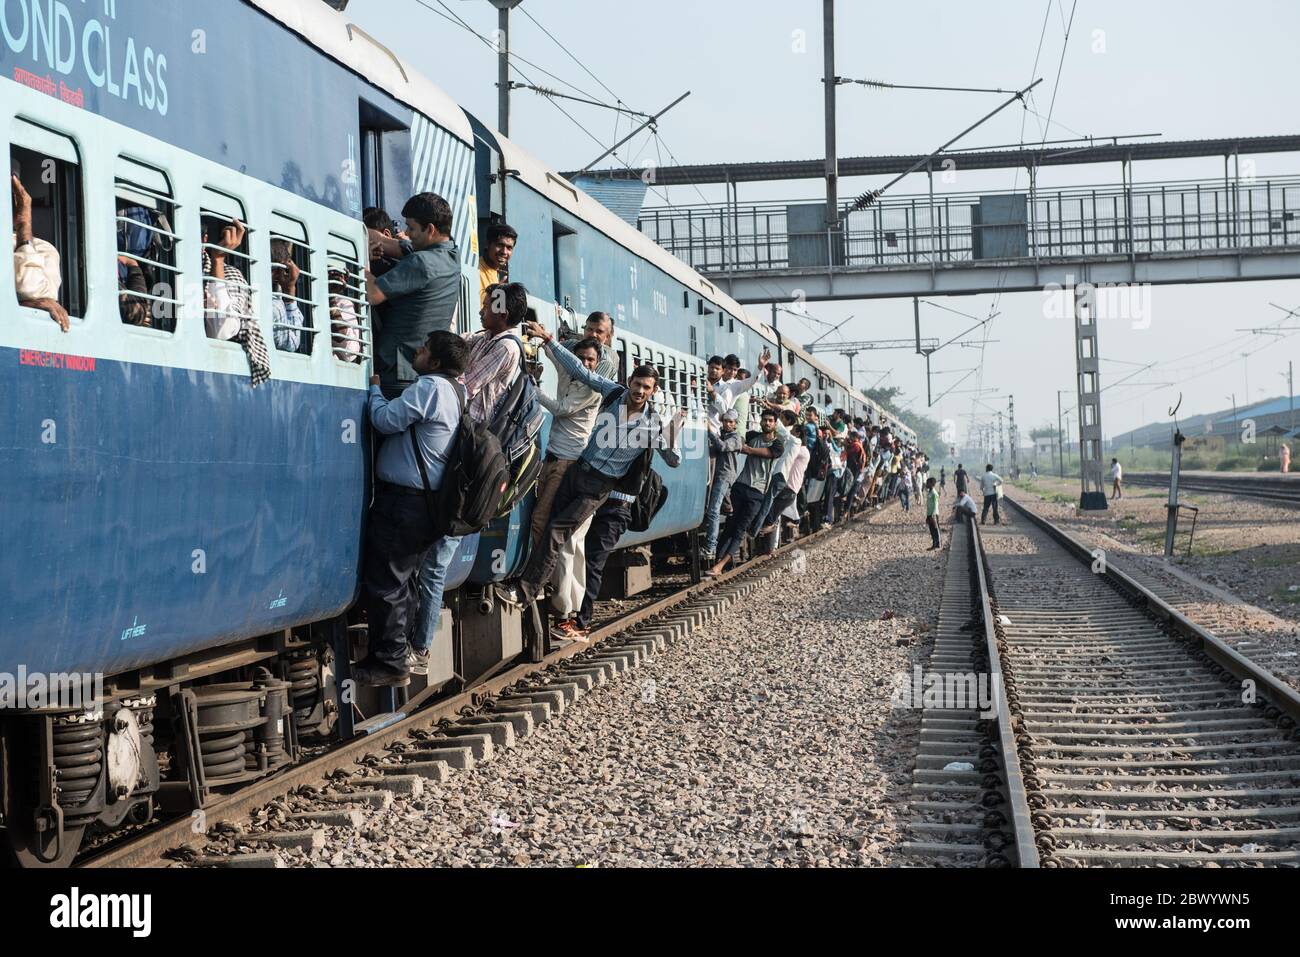 Commuters hang out of an overcrowded Indian Railways train, at Noli Railway Station near Ghaziabad, New Delhi, India. Stock Photo